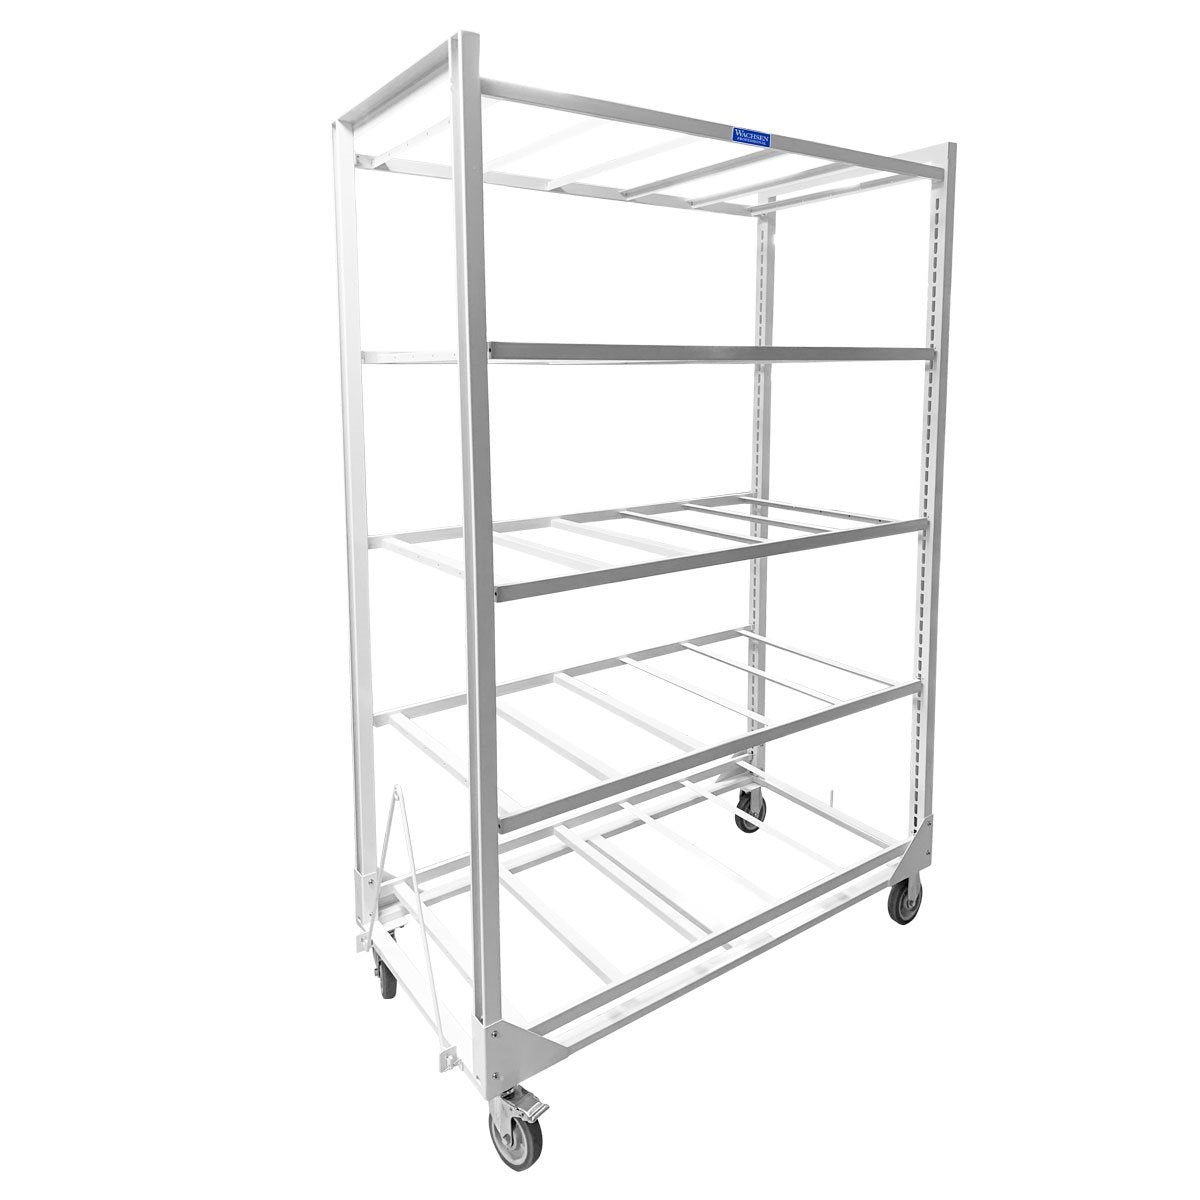 Product Image:Wachsen Cloning Cart 4 Level White